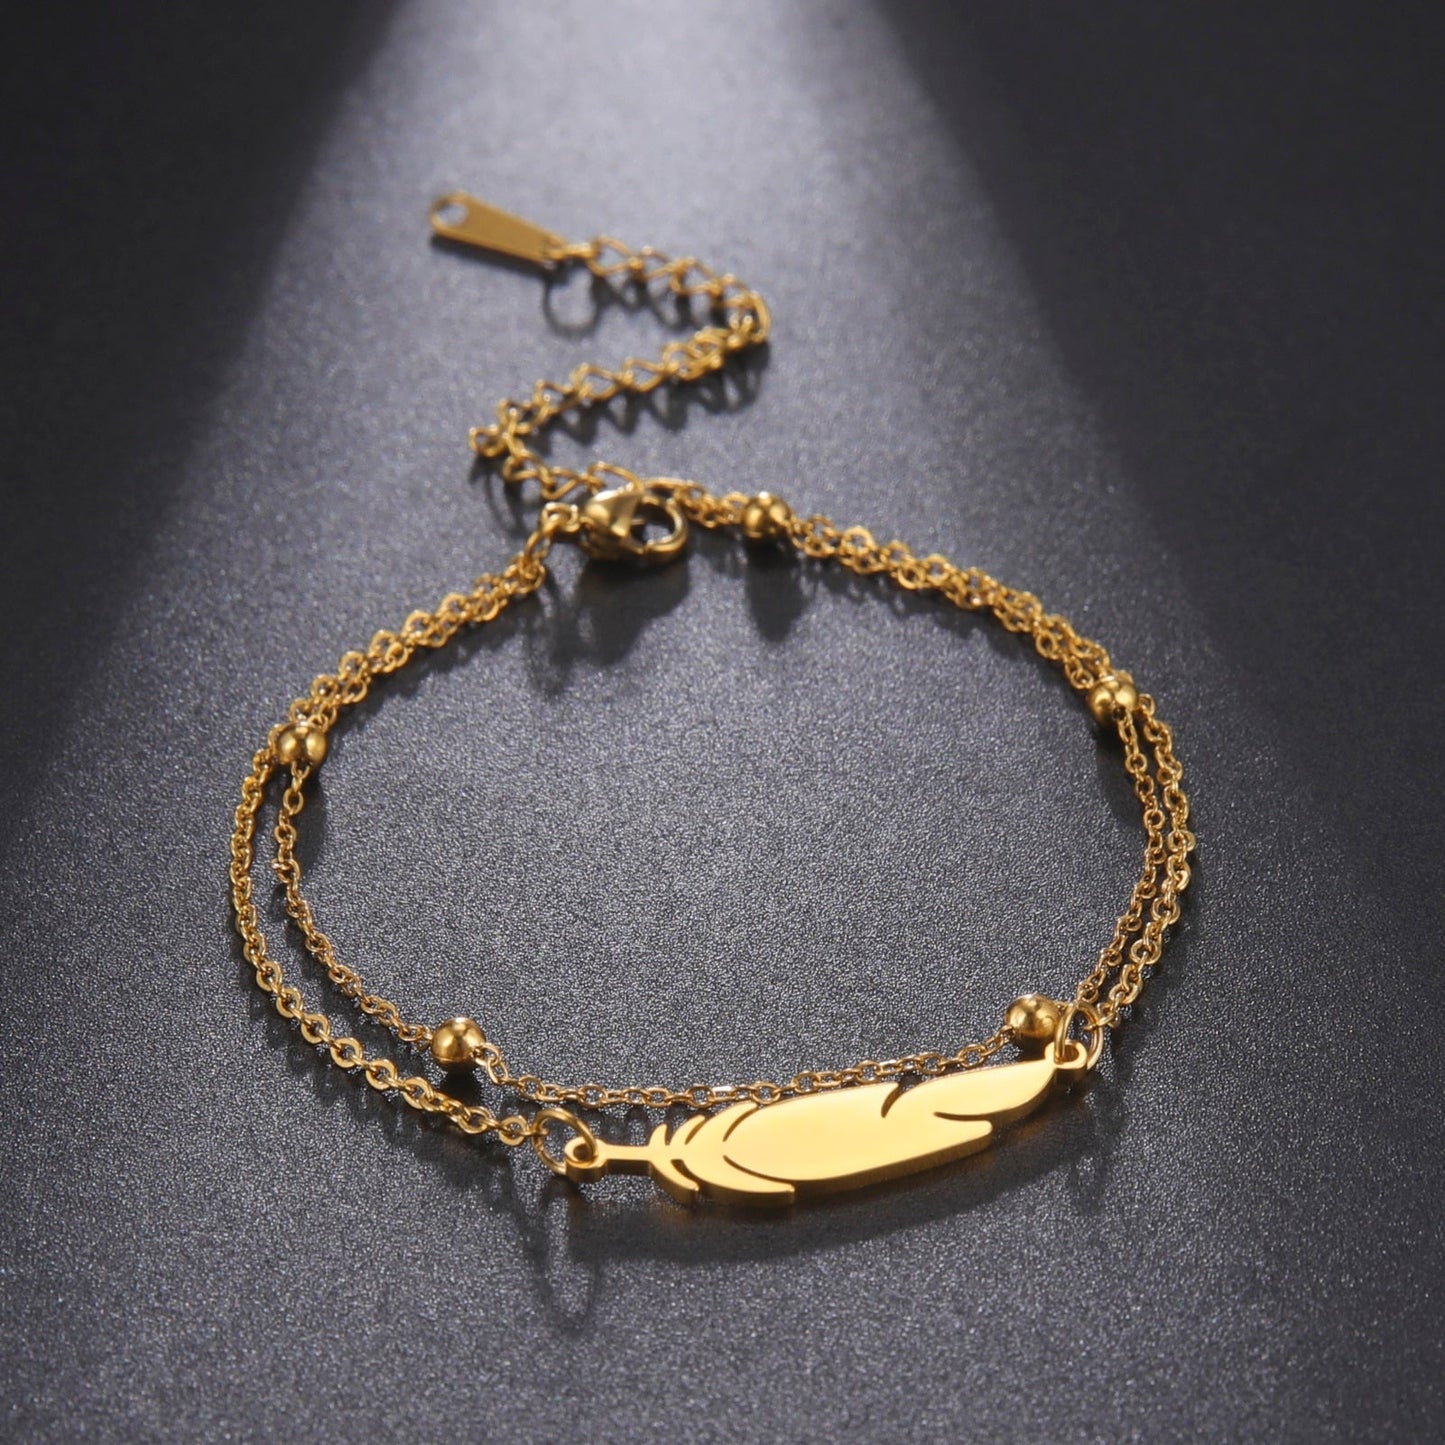 Trendy Anklet - M&H FashionTrendy AnkletM&H FashionM&H Fashion200001034:361187#Gold colorGold colorTrendy AnkletM&H FashionM&H FashionThis Trendy Anklet is the perfect accessory for any outfit. It features a feather and double chain design, made from stainless steel and metal. The length is 21cm+5cTrendy Anklet